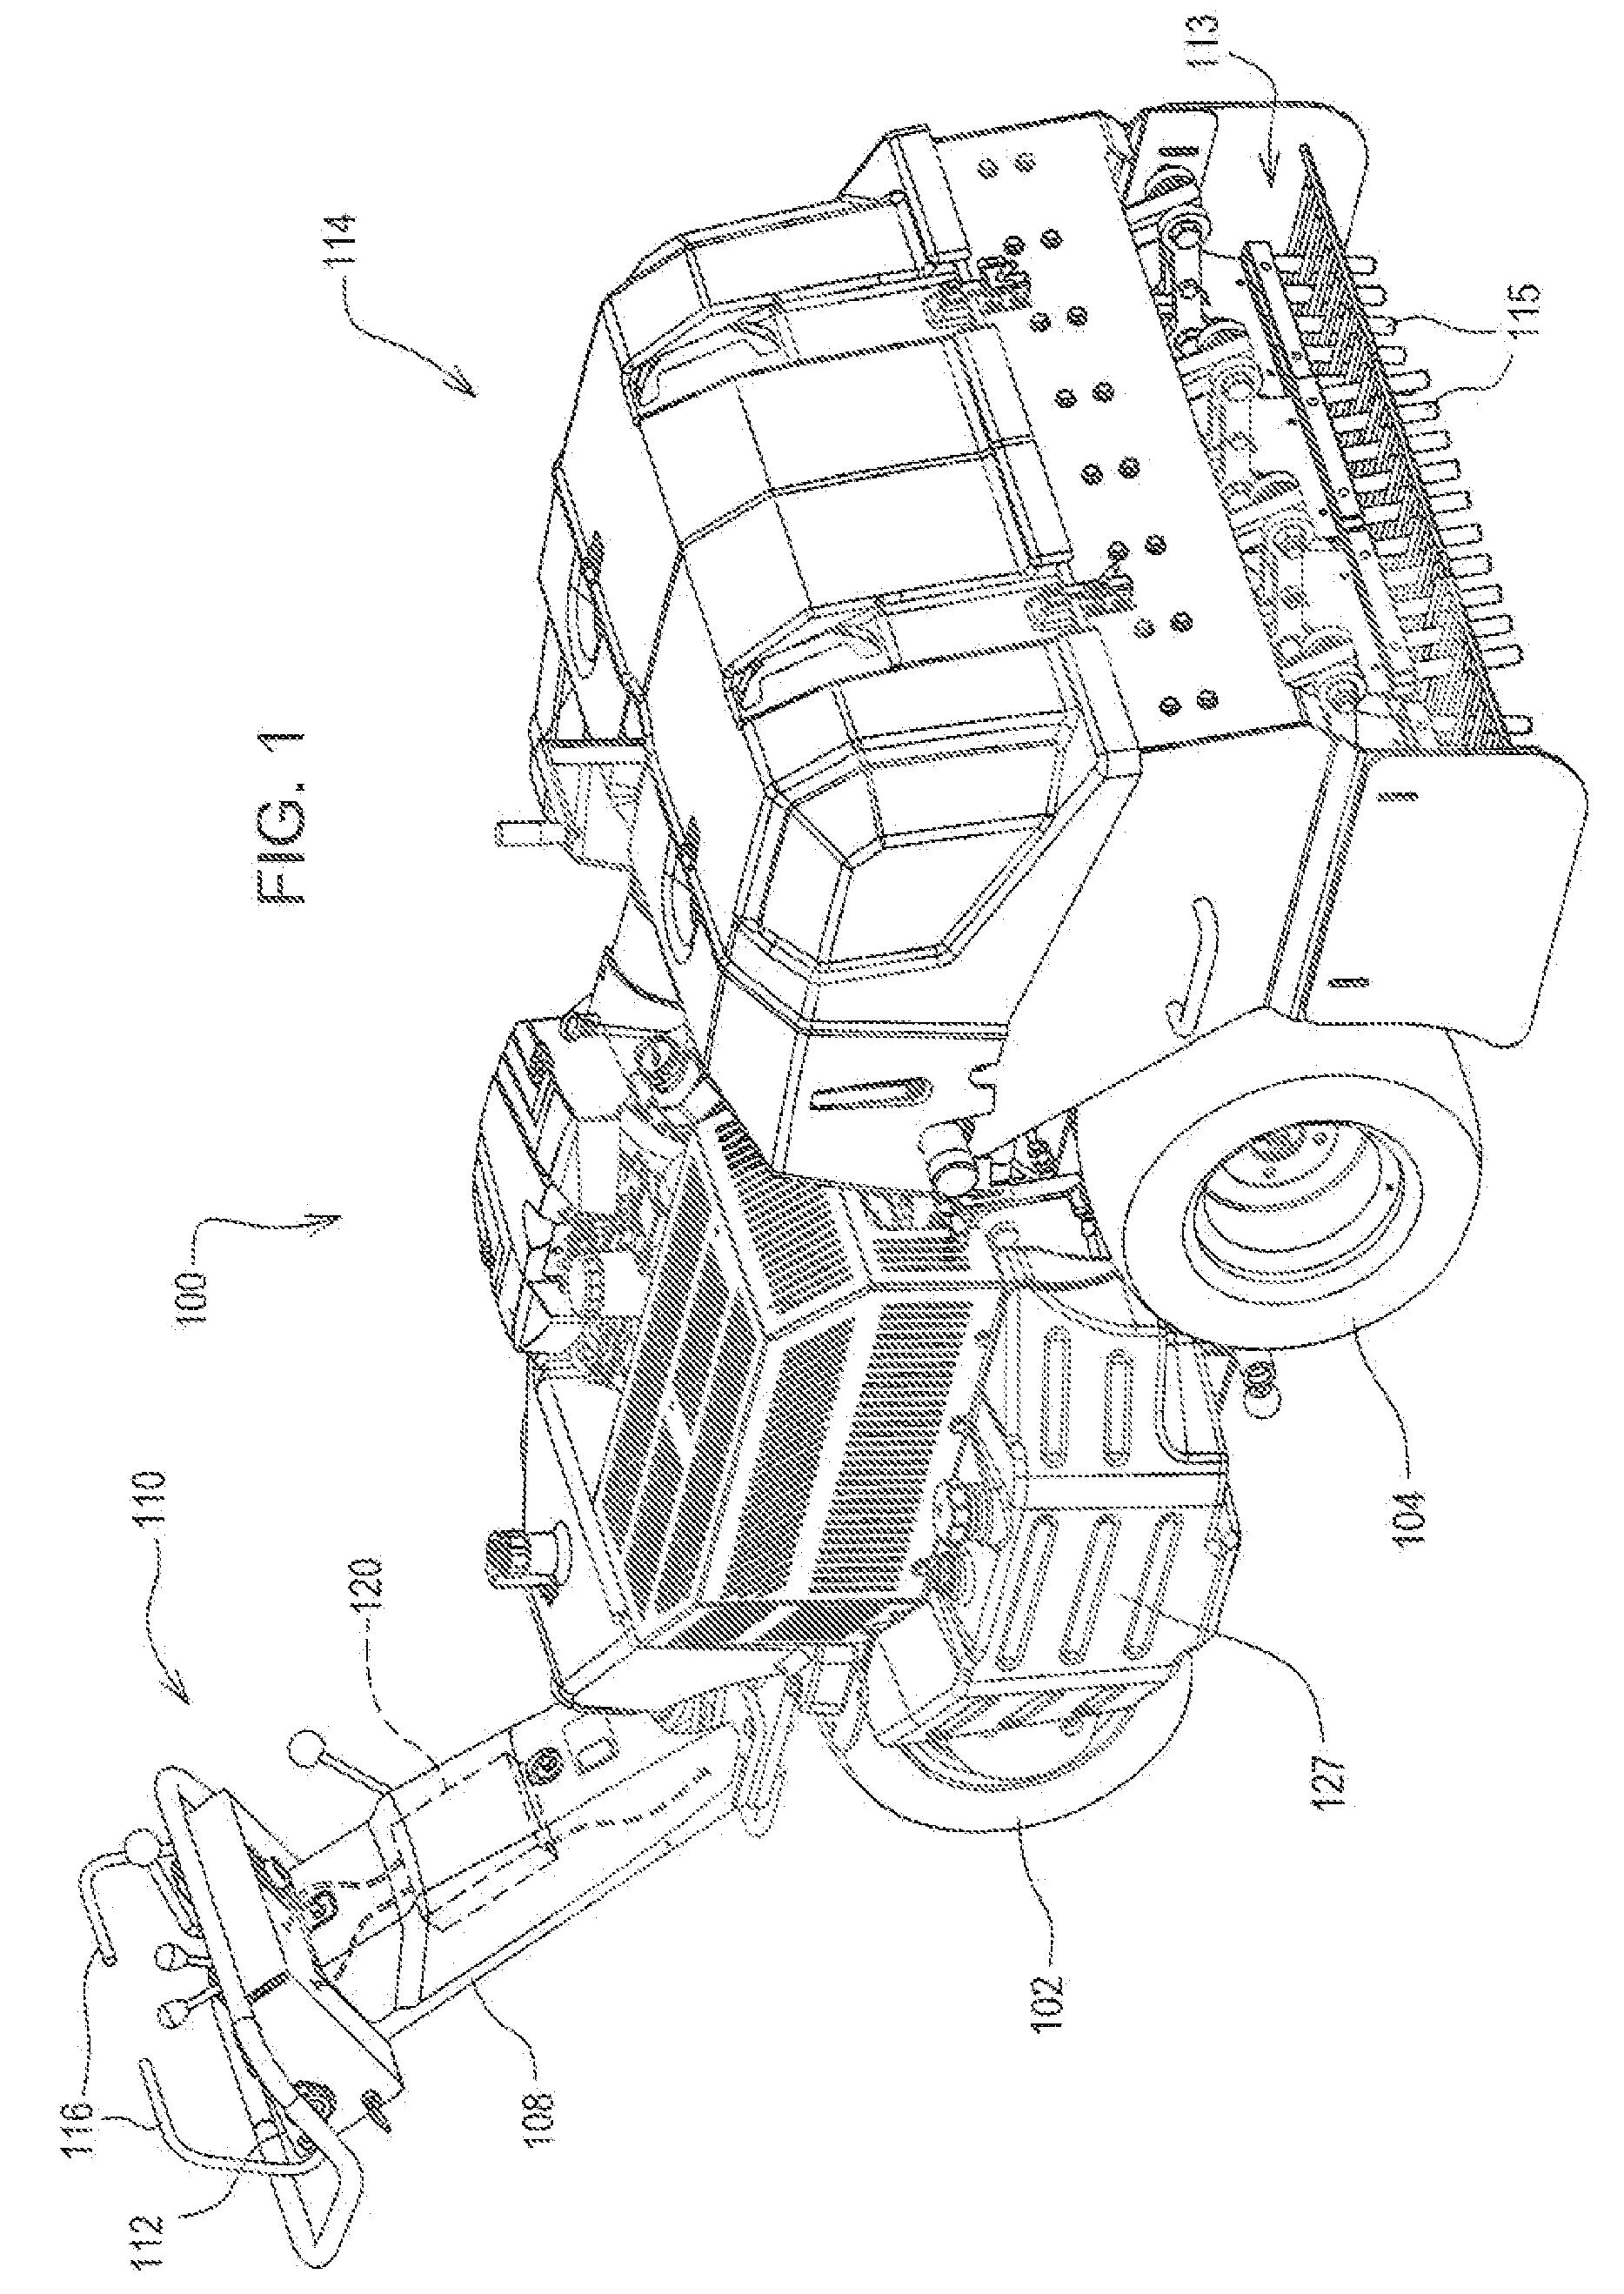 Aerator With Low Fuel Level Control